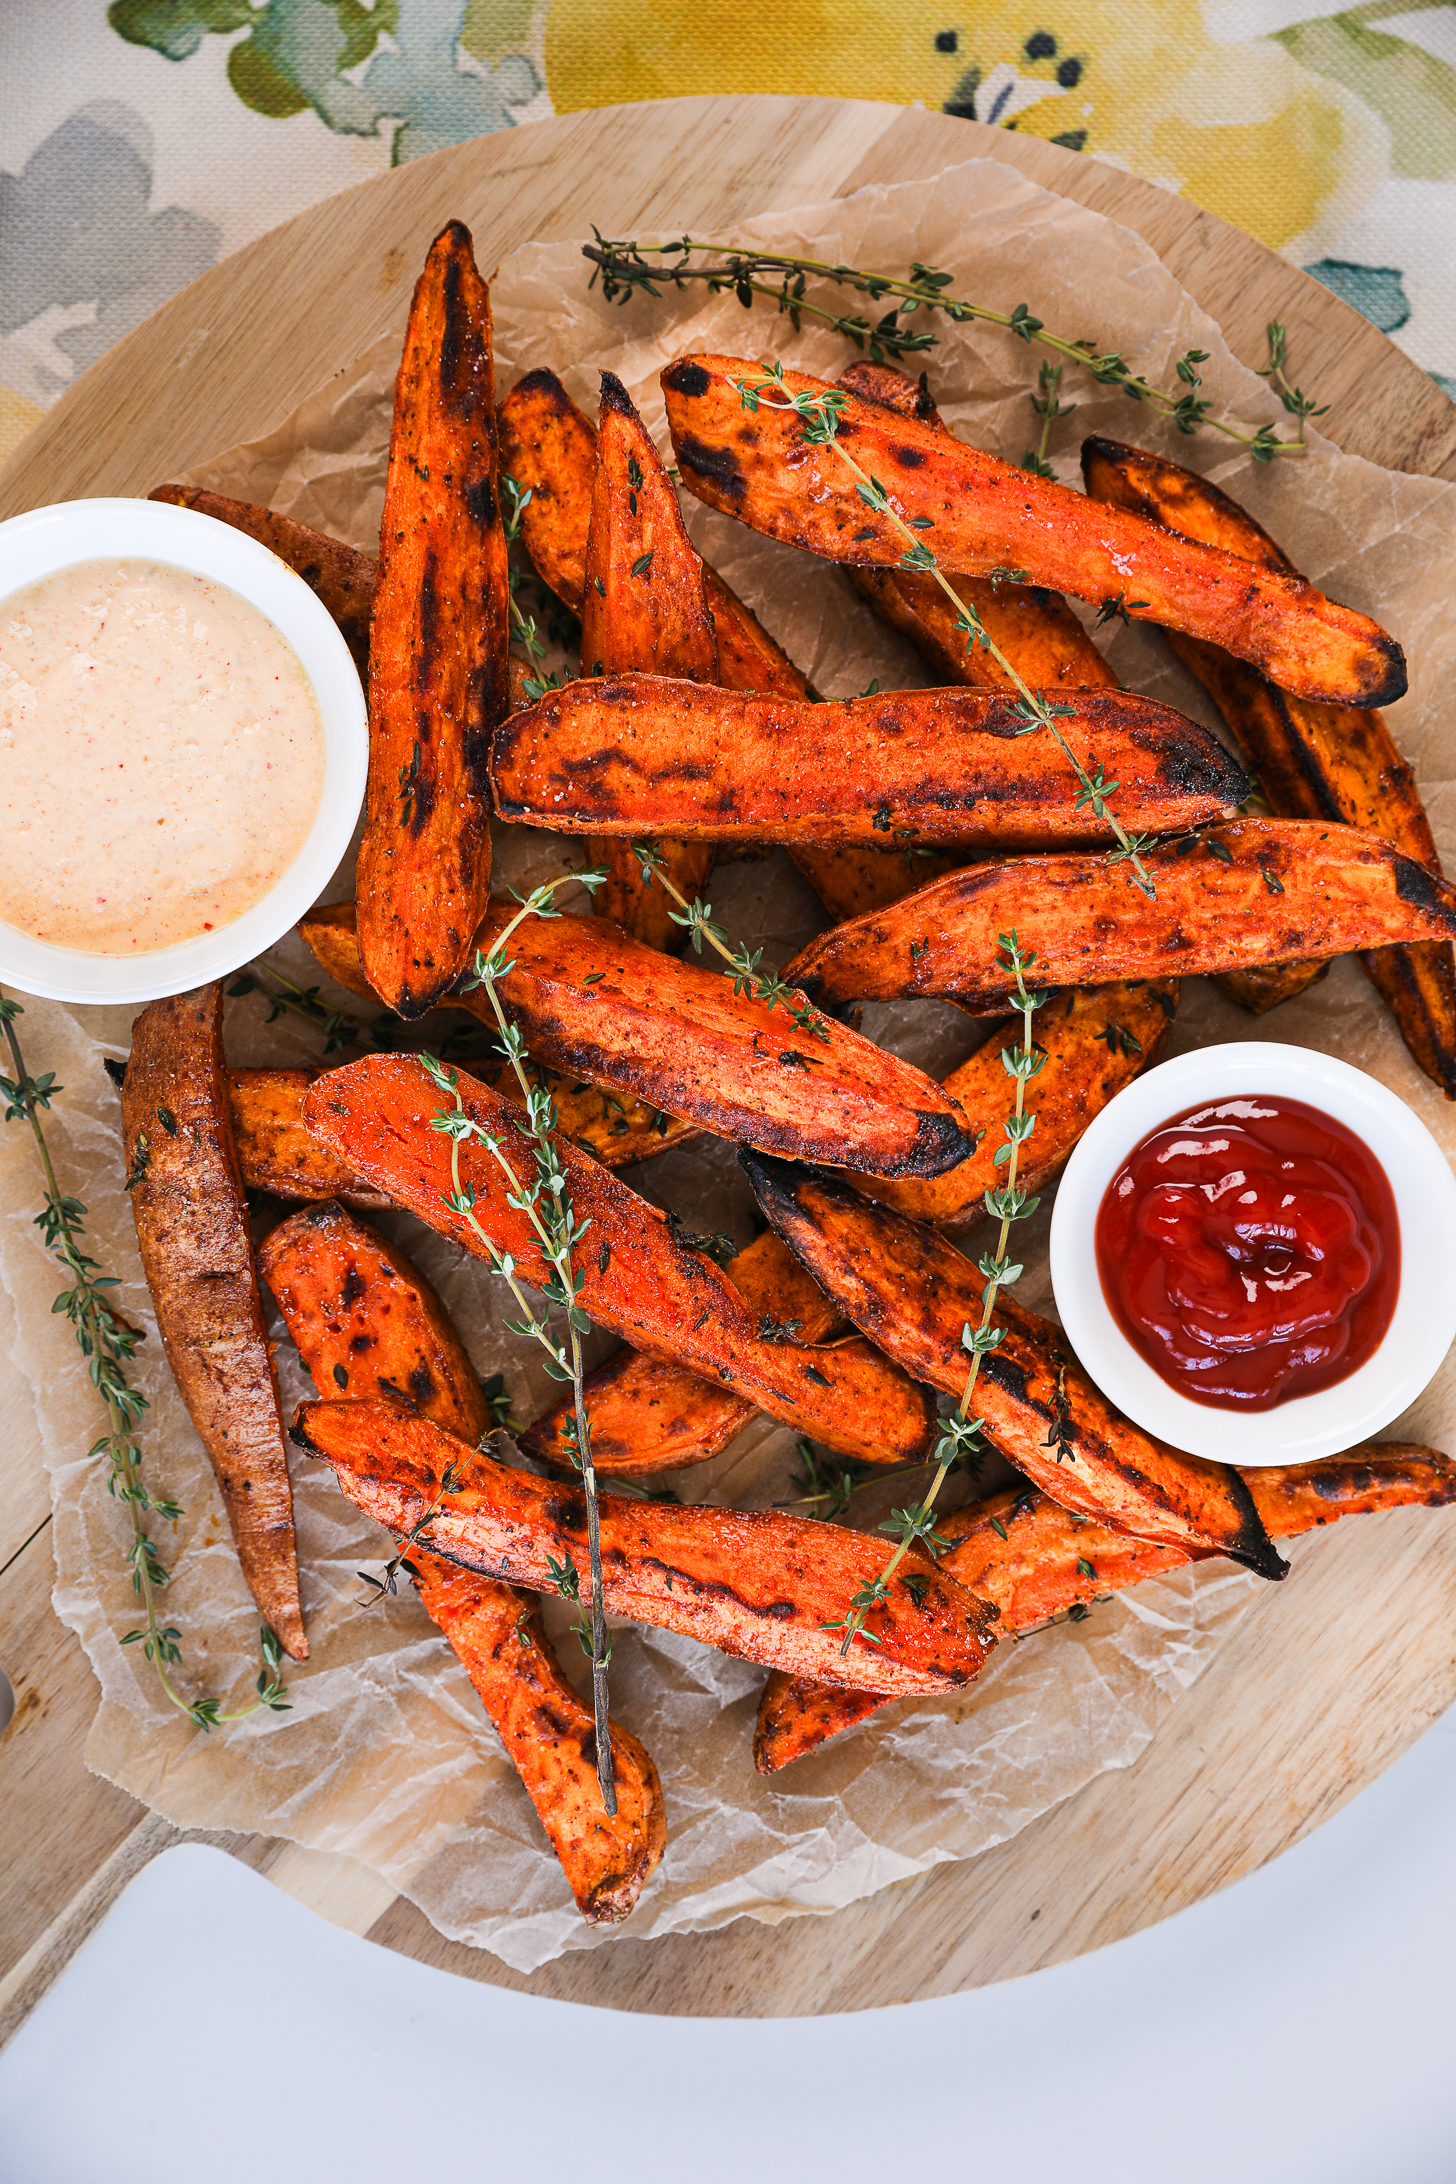 An overhead photo showcasing a stack of sweet potato wedges adorned with thyme sprigs, accompanied by two sauces nearby.